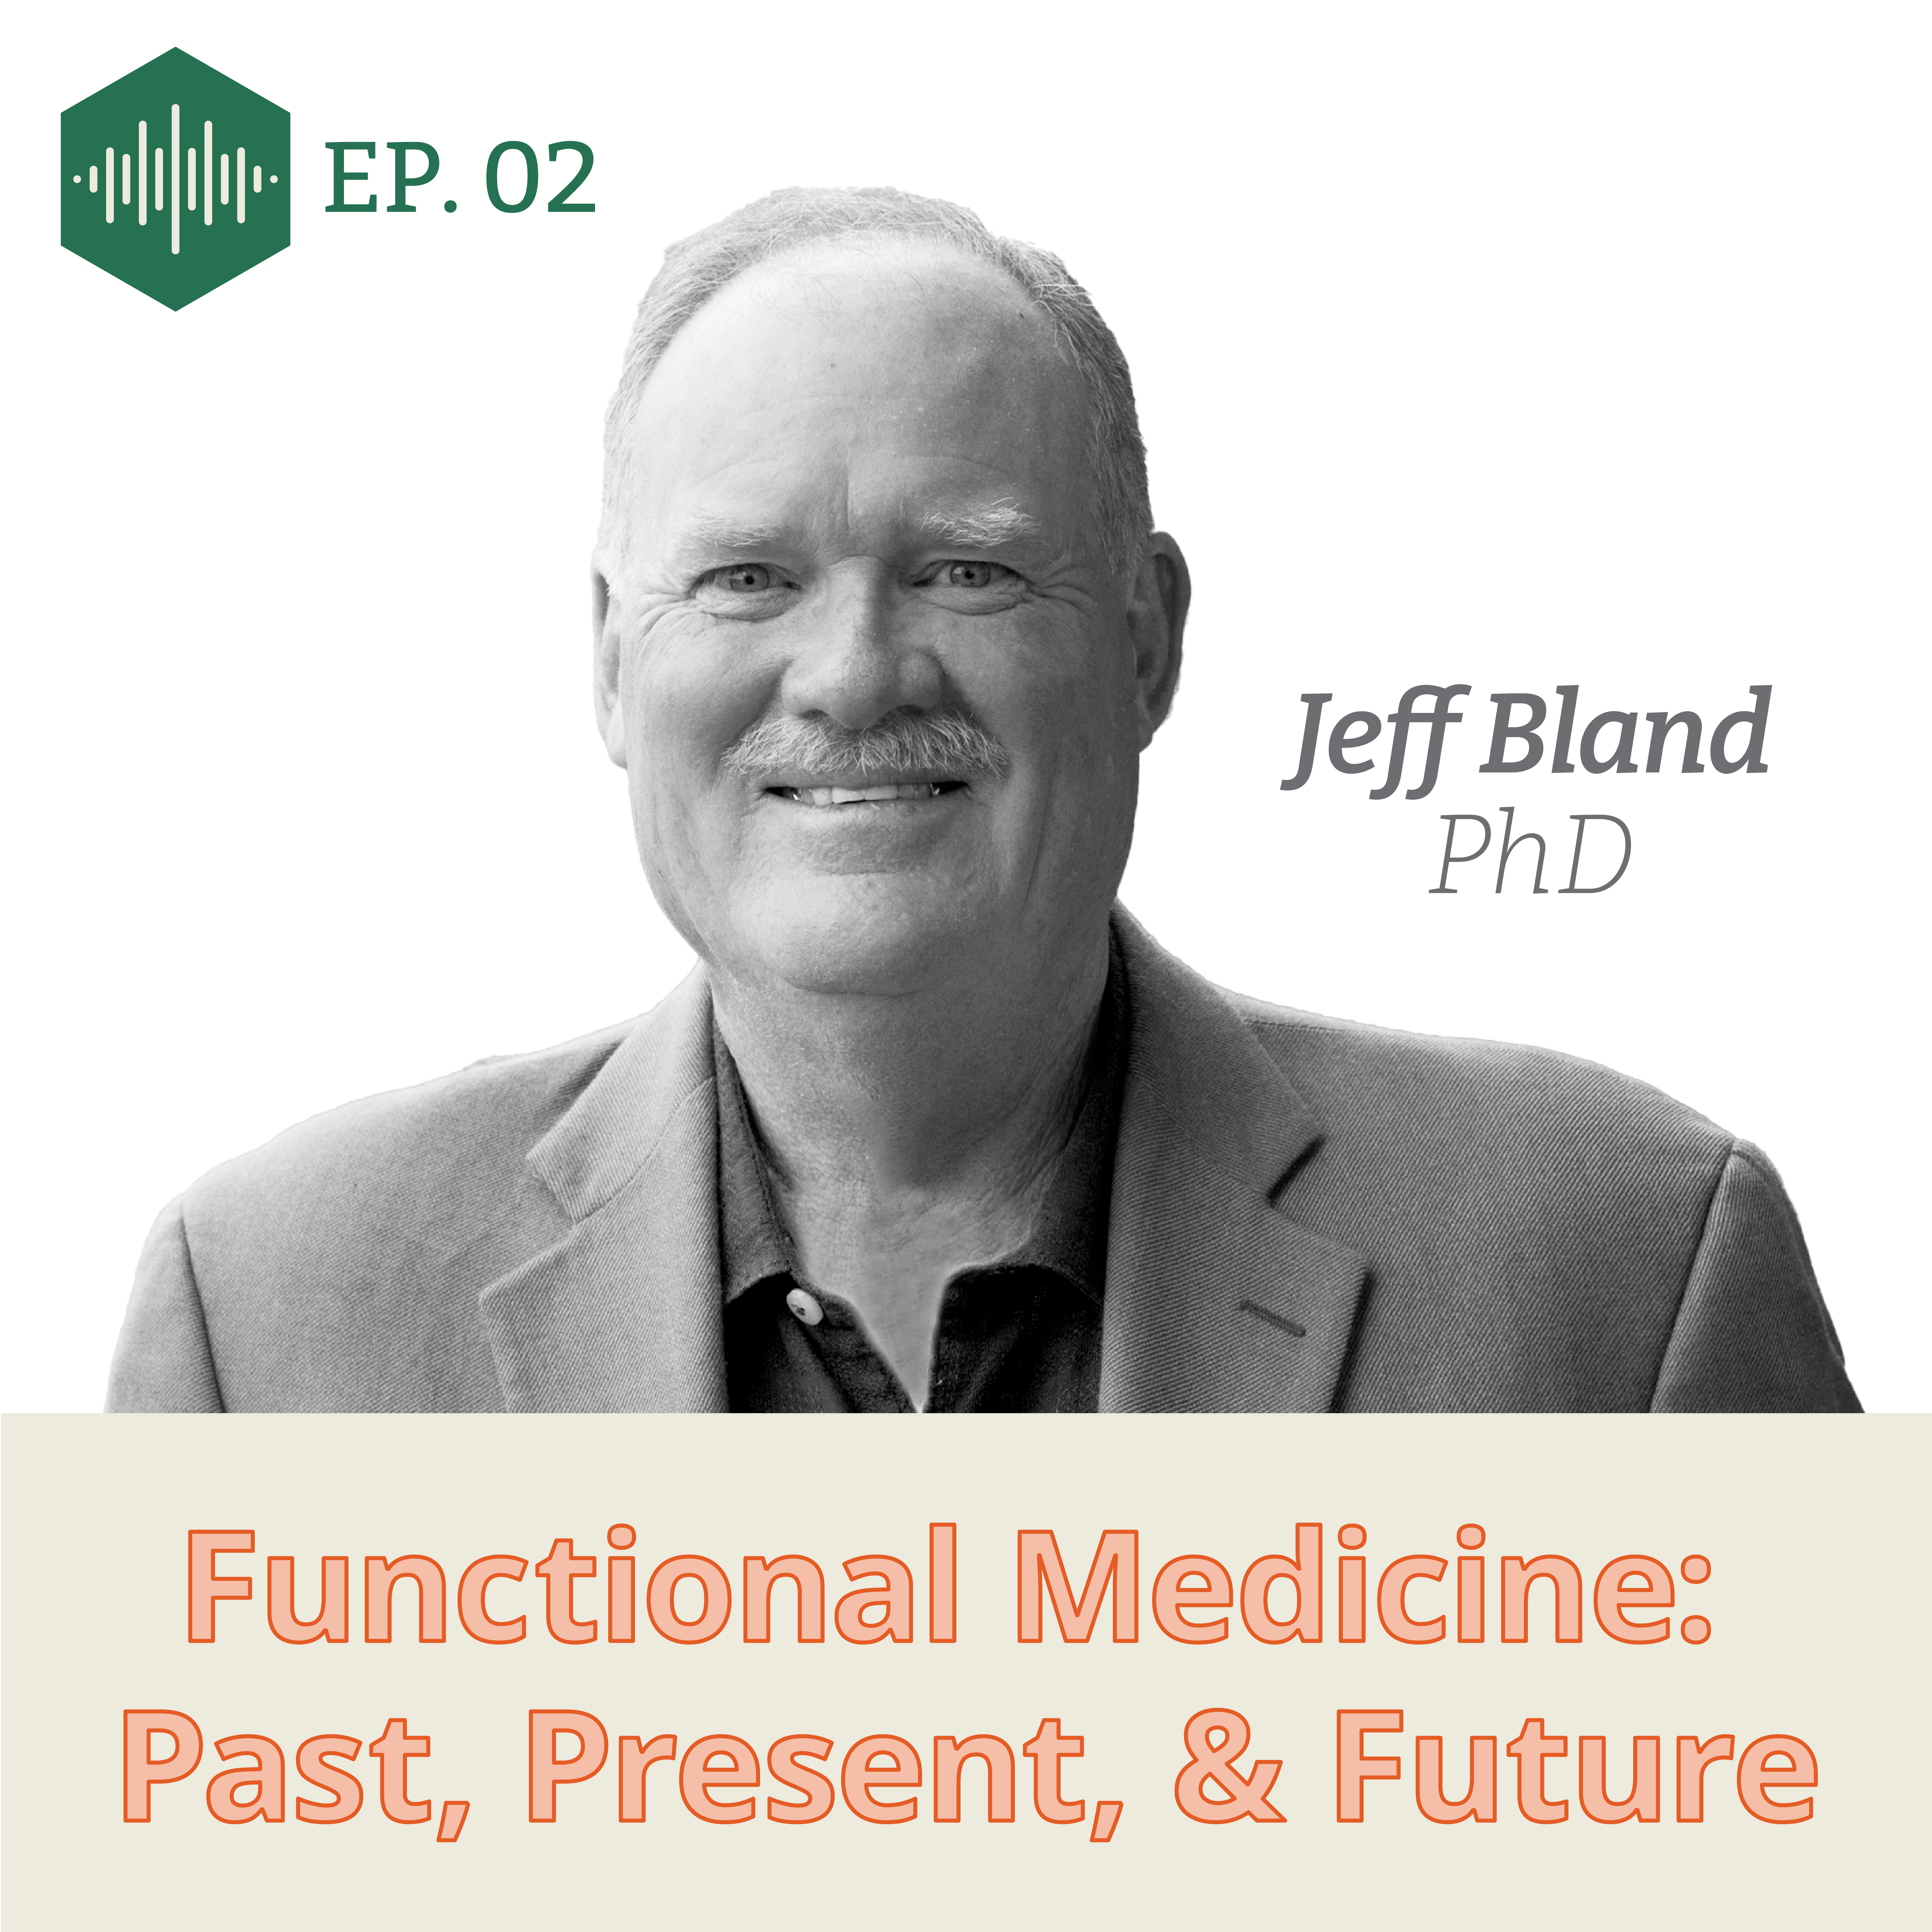 photo of dr. jeff bland with the title of his podcast episode: "Functional Medicine: Past, Present, and Future